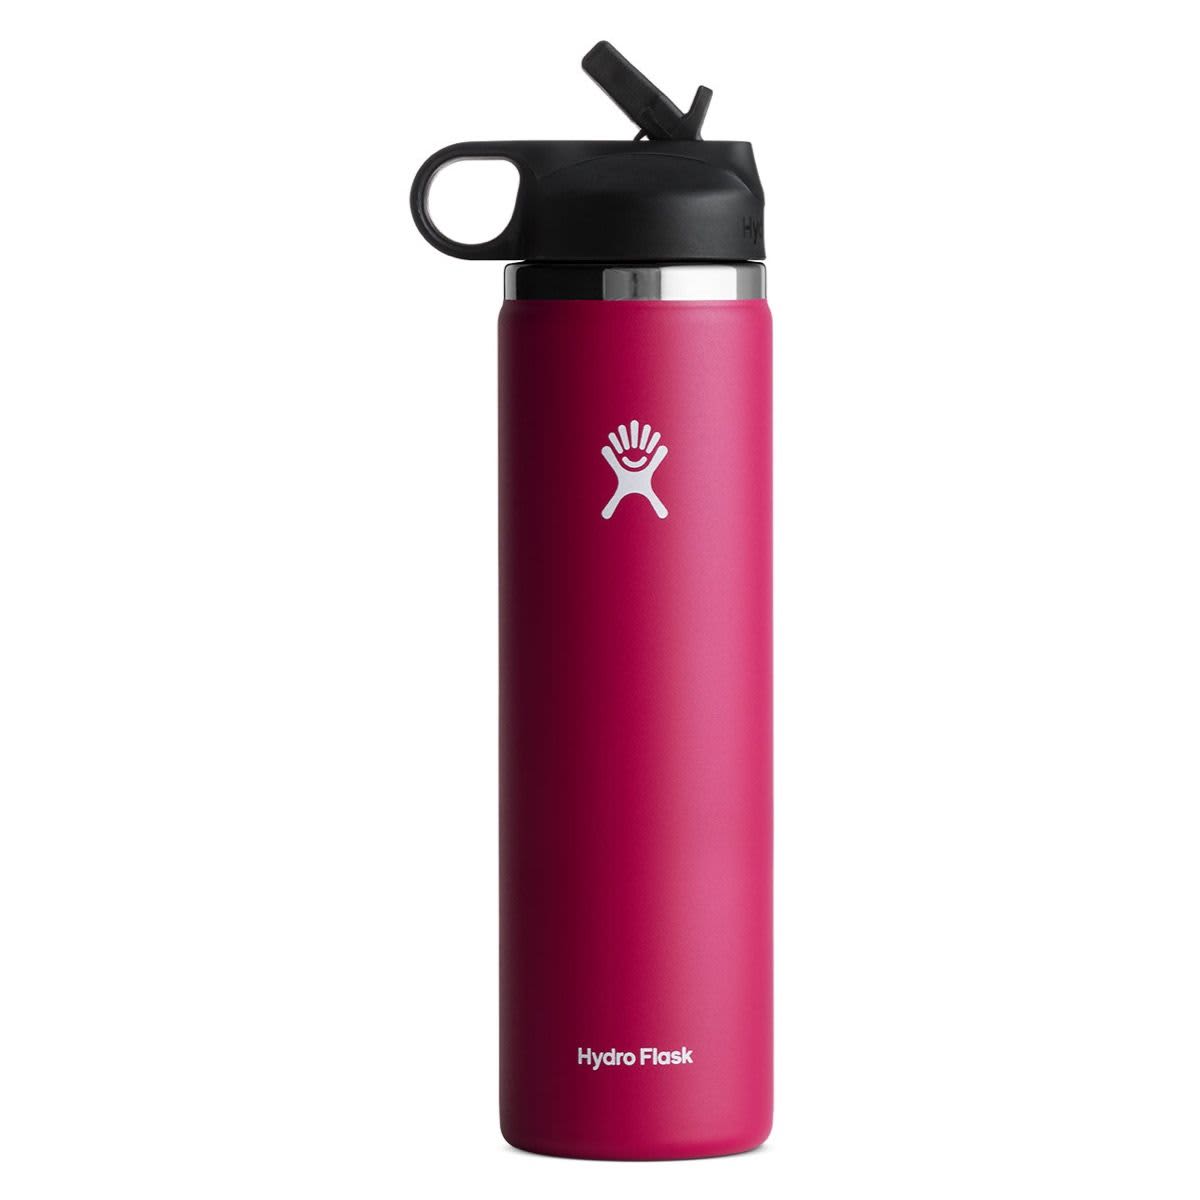 https://cdn.apartmenttherapy.info/image/upload/v1659379835/gen-workflow/product-database/hydro_flask_24oz_wide_mouth.jpg